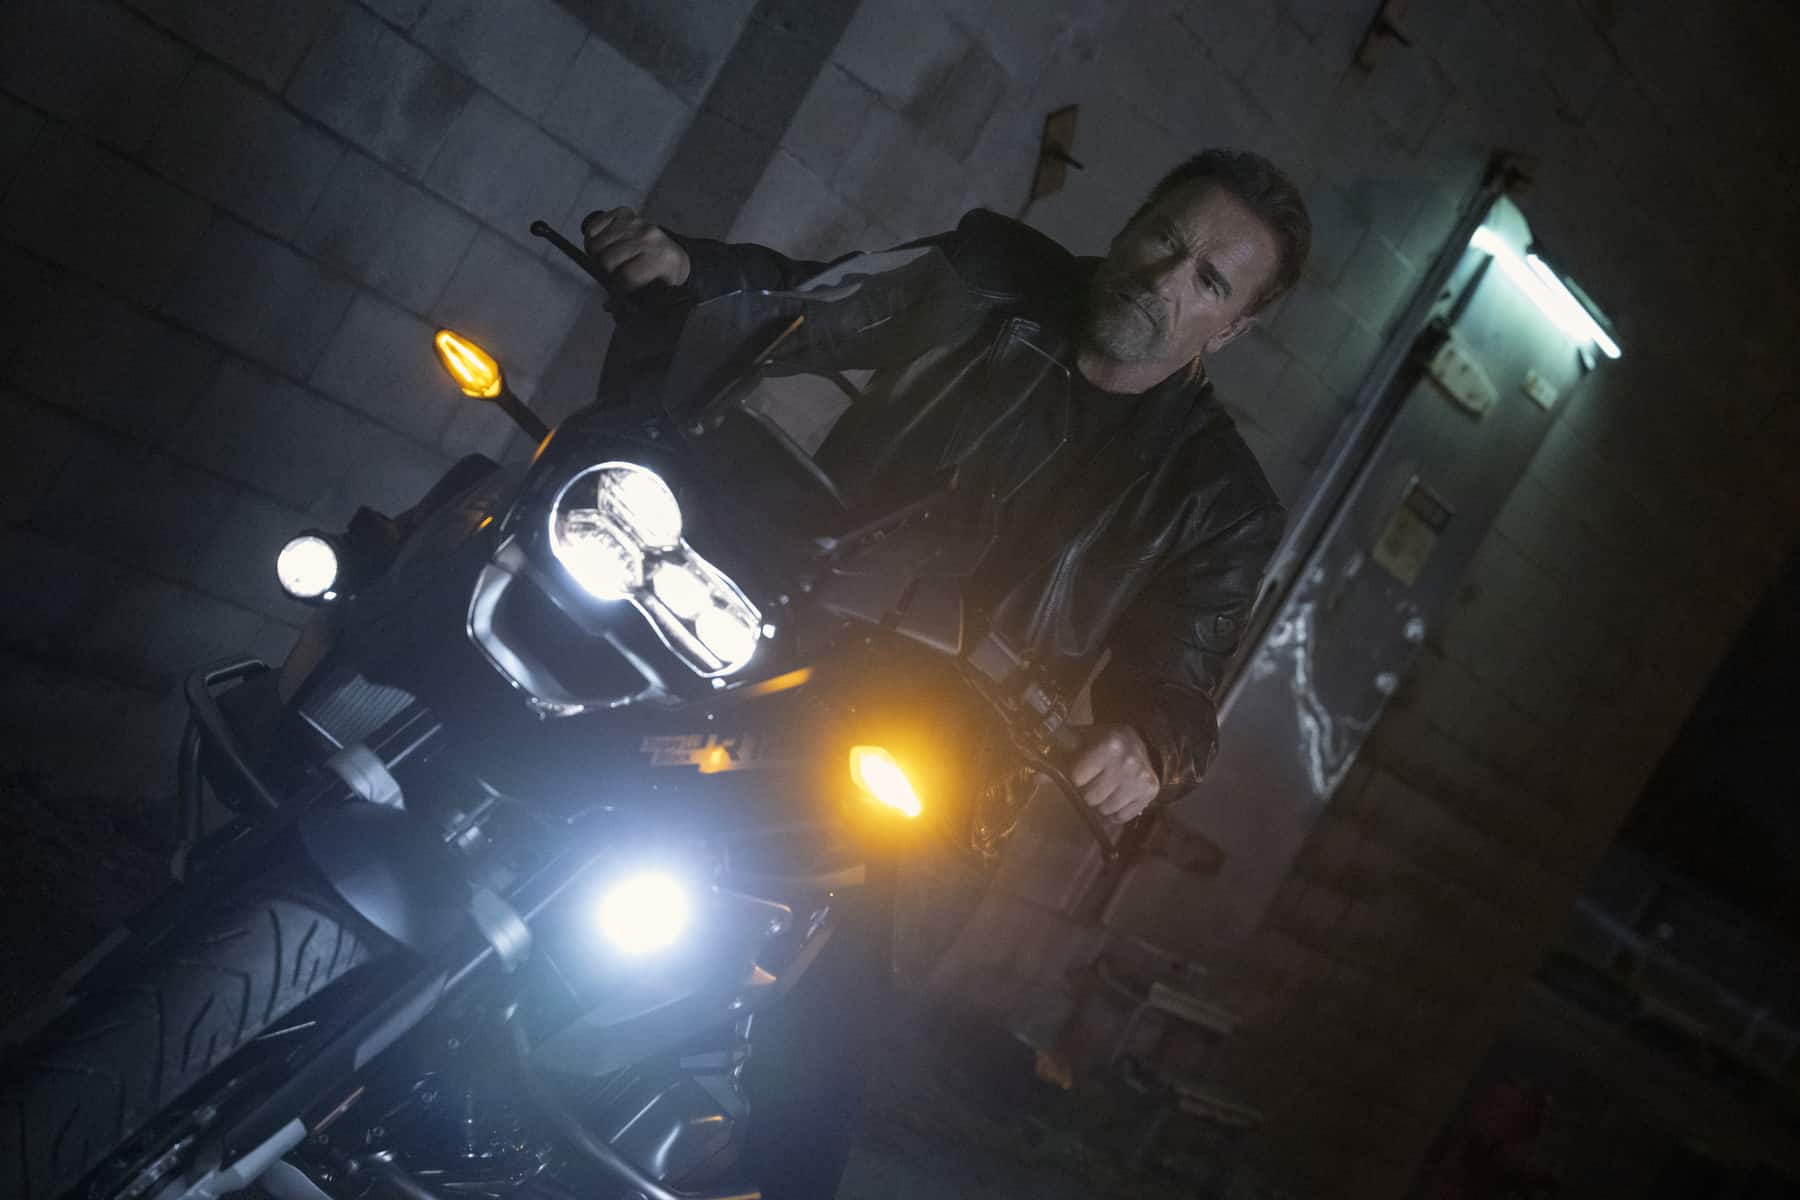 Arnold Schwarzenegger rides a motorcycle in this image from Blackjack Films Inc.